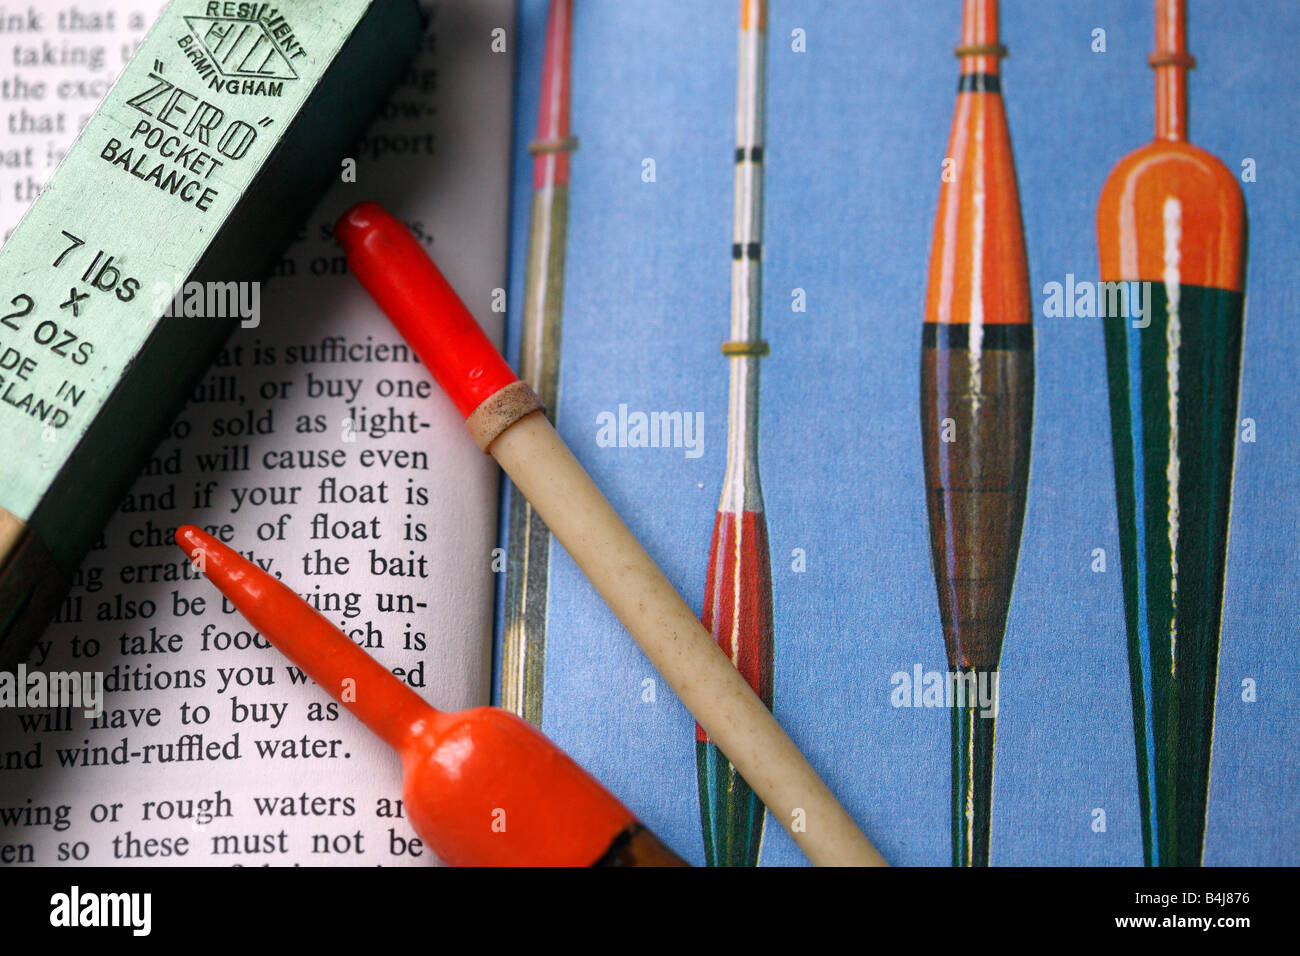 https://c8.alamy.com/comp/B4J876/vintage-fishing-floats-nestled-between-the-pages-of-old-book-on-angling-B4J876.jpg